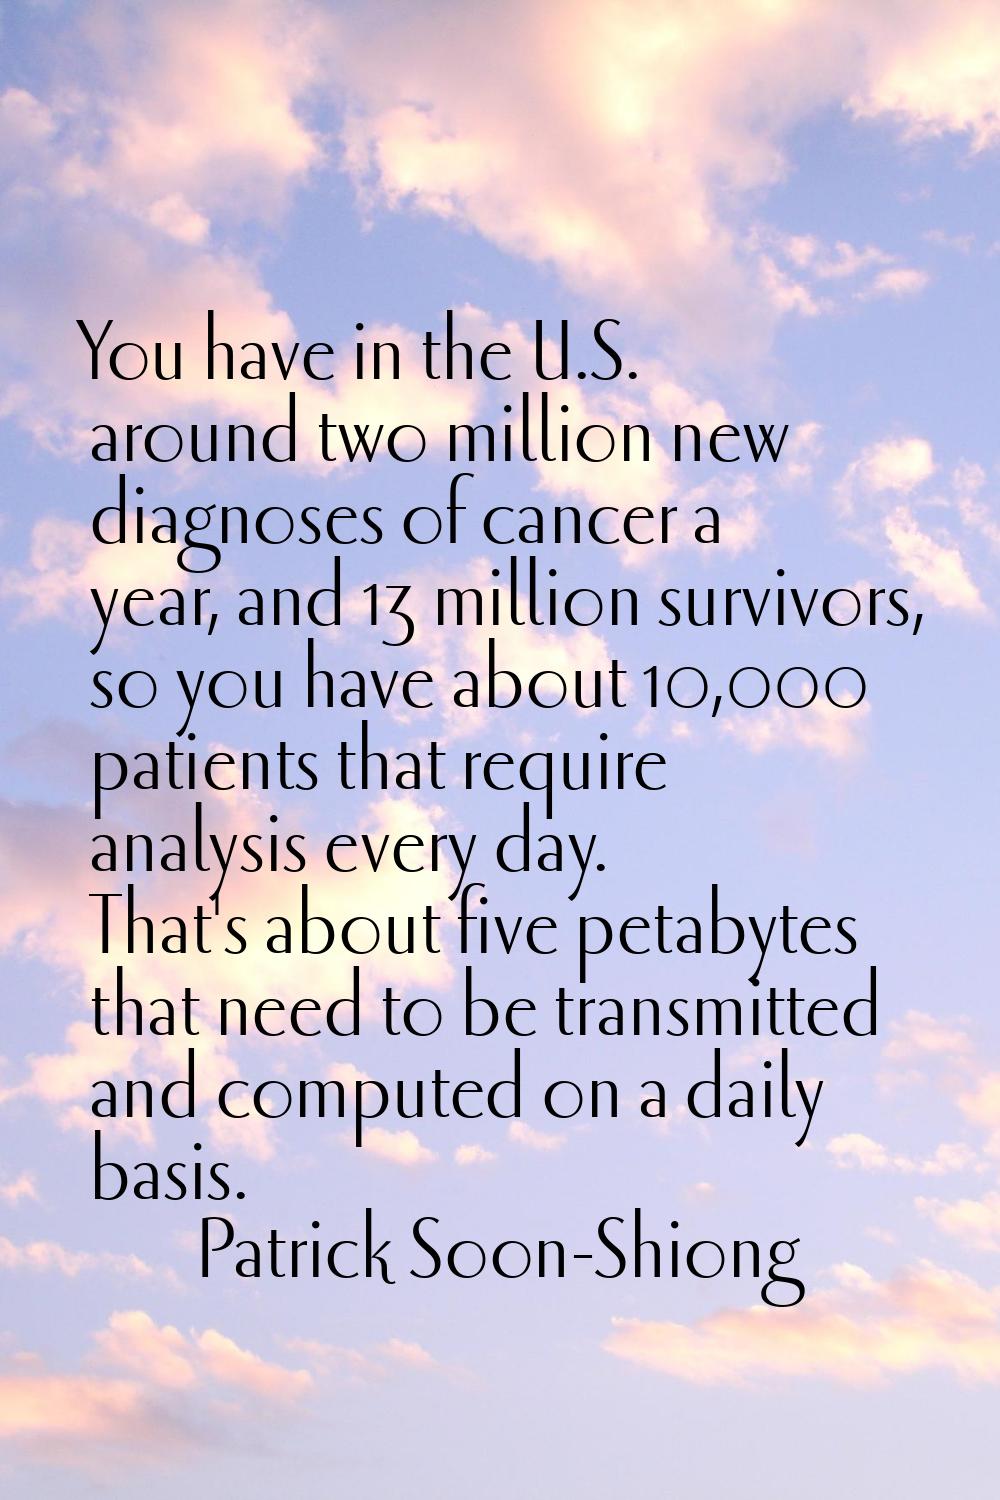 You have in the U.S. around two million new diagnoses of cancer a year, and 13 million survivors, s